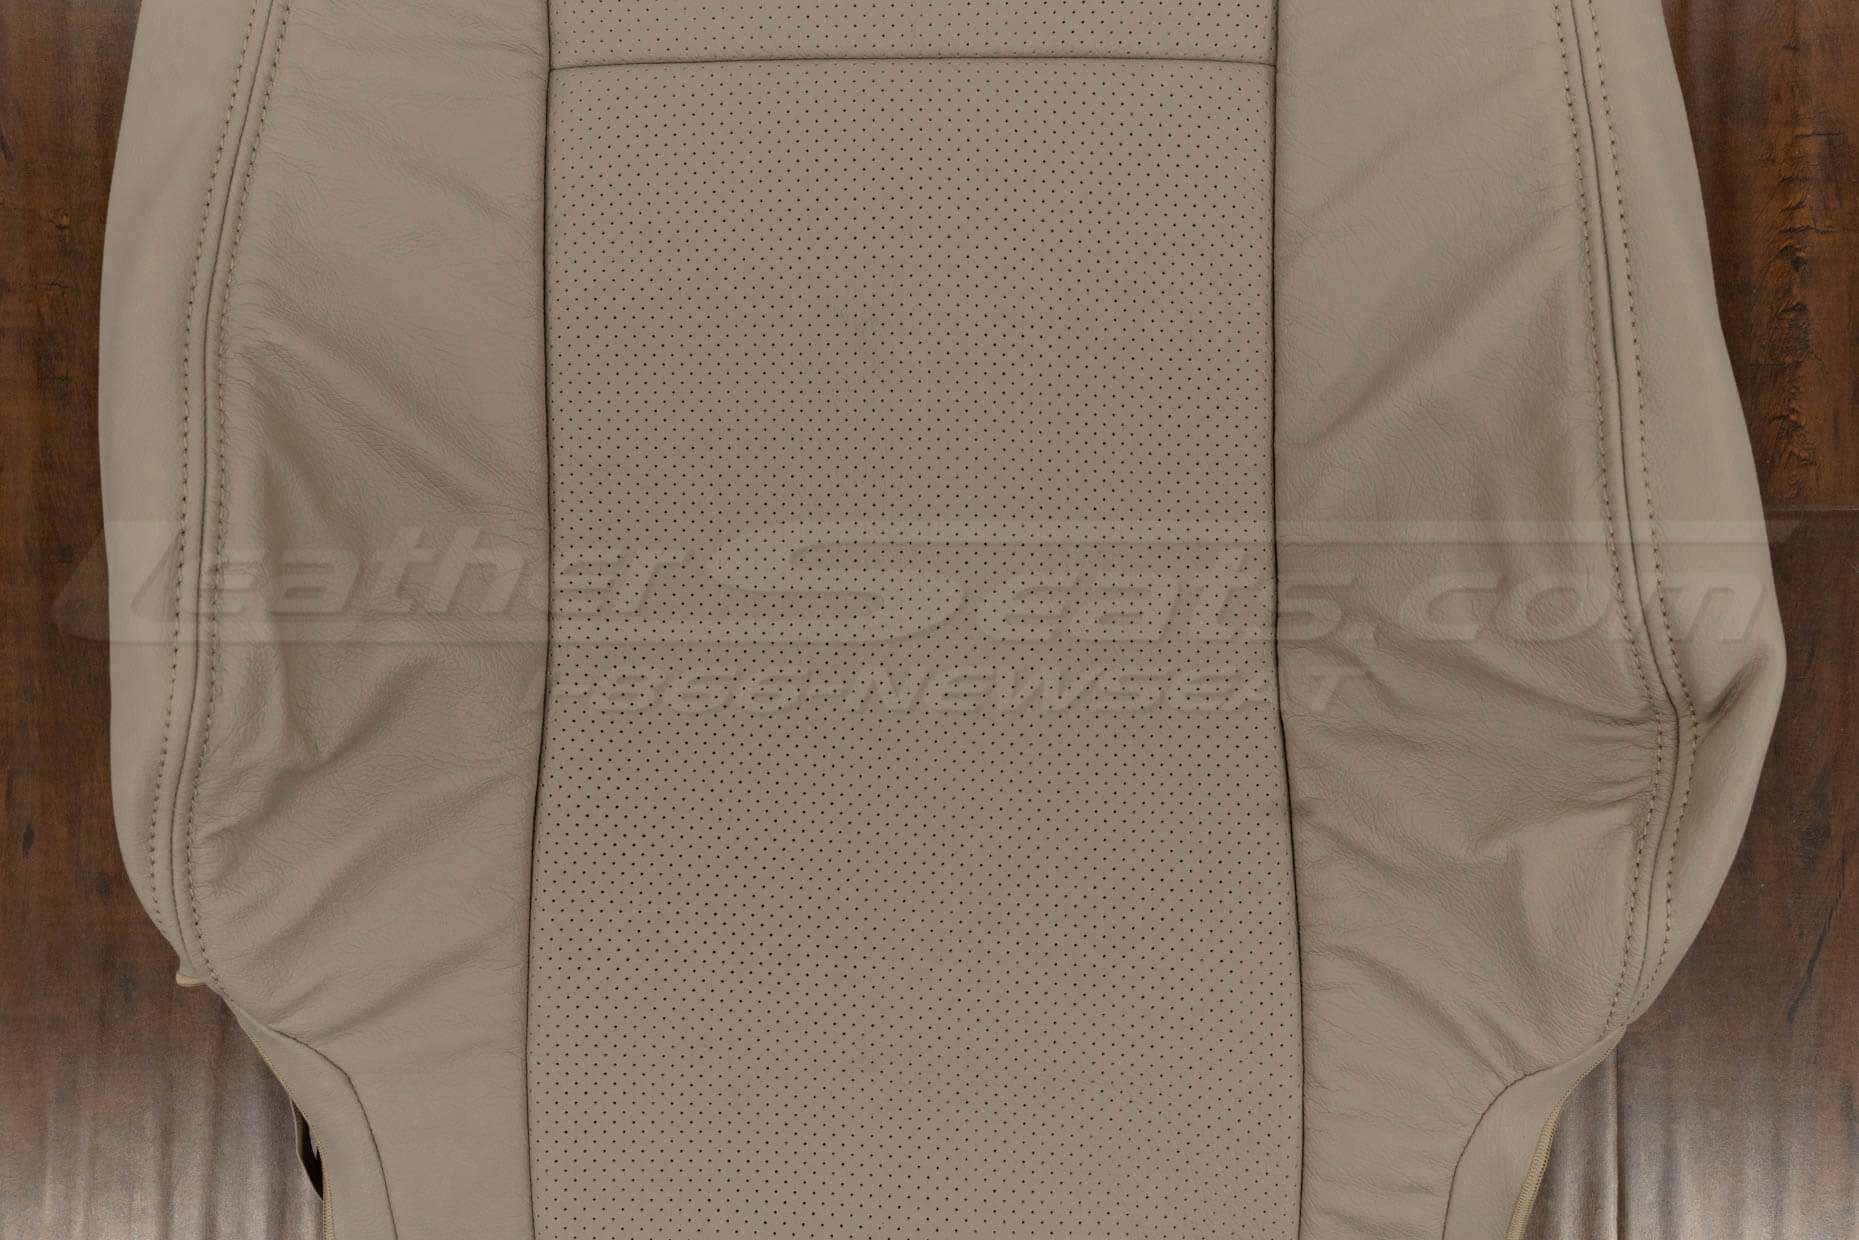 Perforated body section of backrest